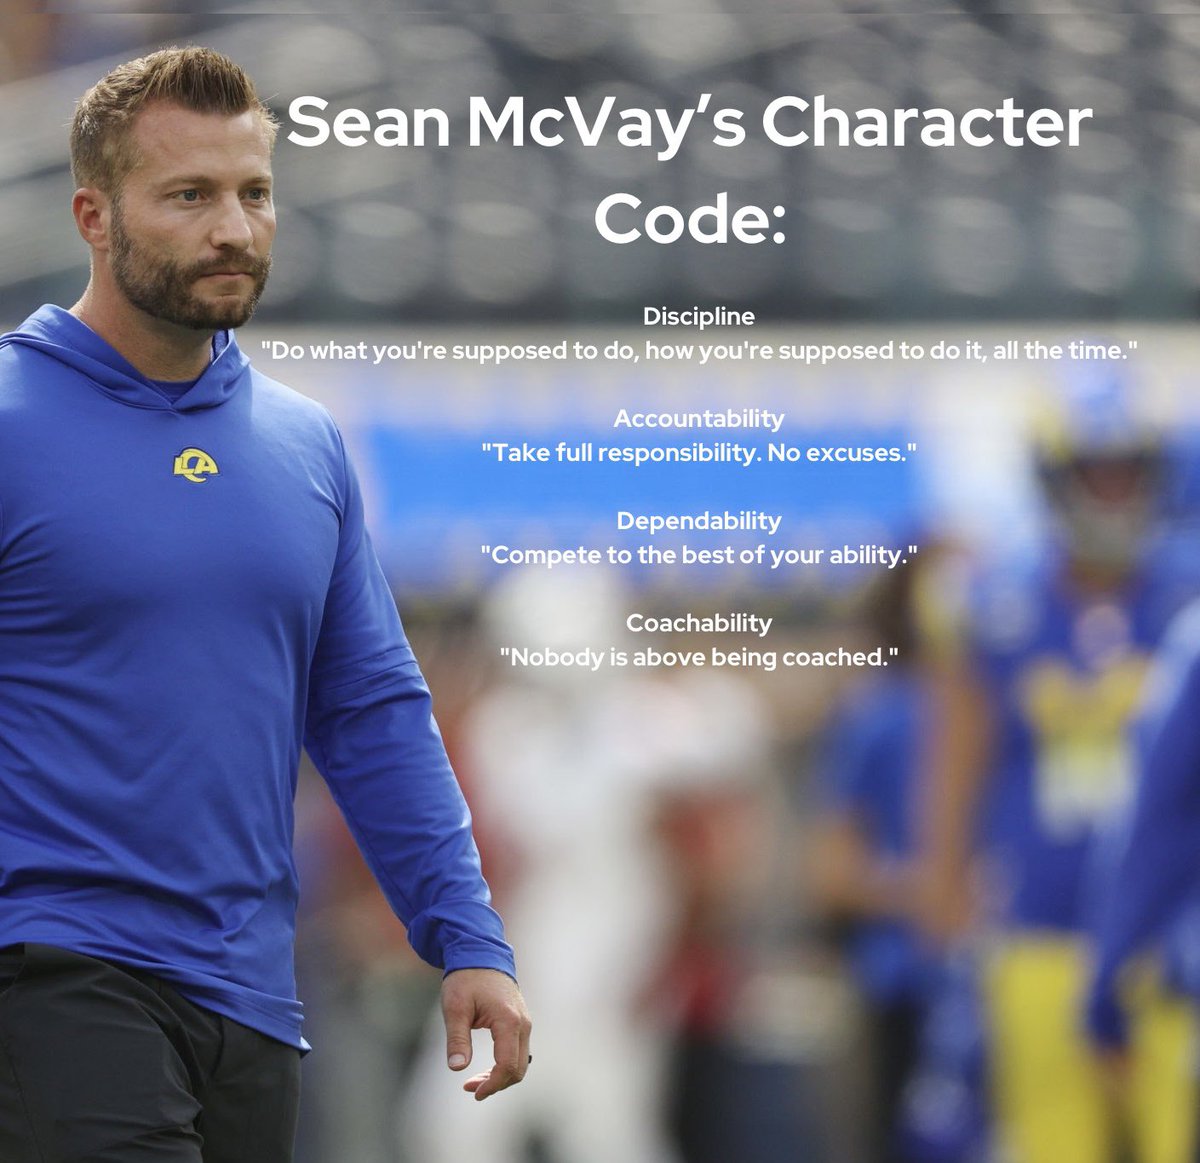 Coach Sean McVay’s Character Code: Discipline 'Do what you're supposed to do, how you're supposed to do it, all the time.' Accountability 'Take full responsibility. No excuses.' Dependability 'Compete to the best of your ability.' Coachability 'Nobody is above being coached.'